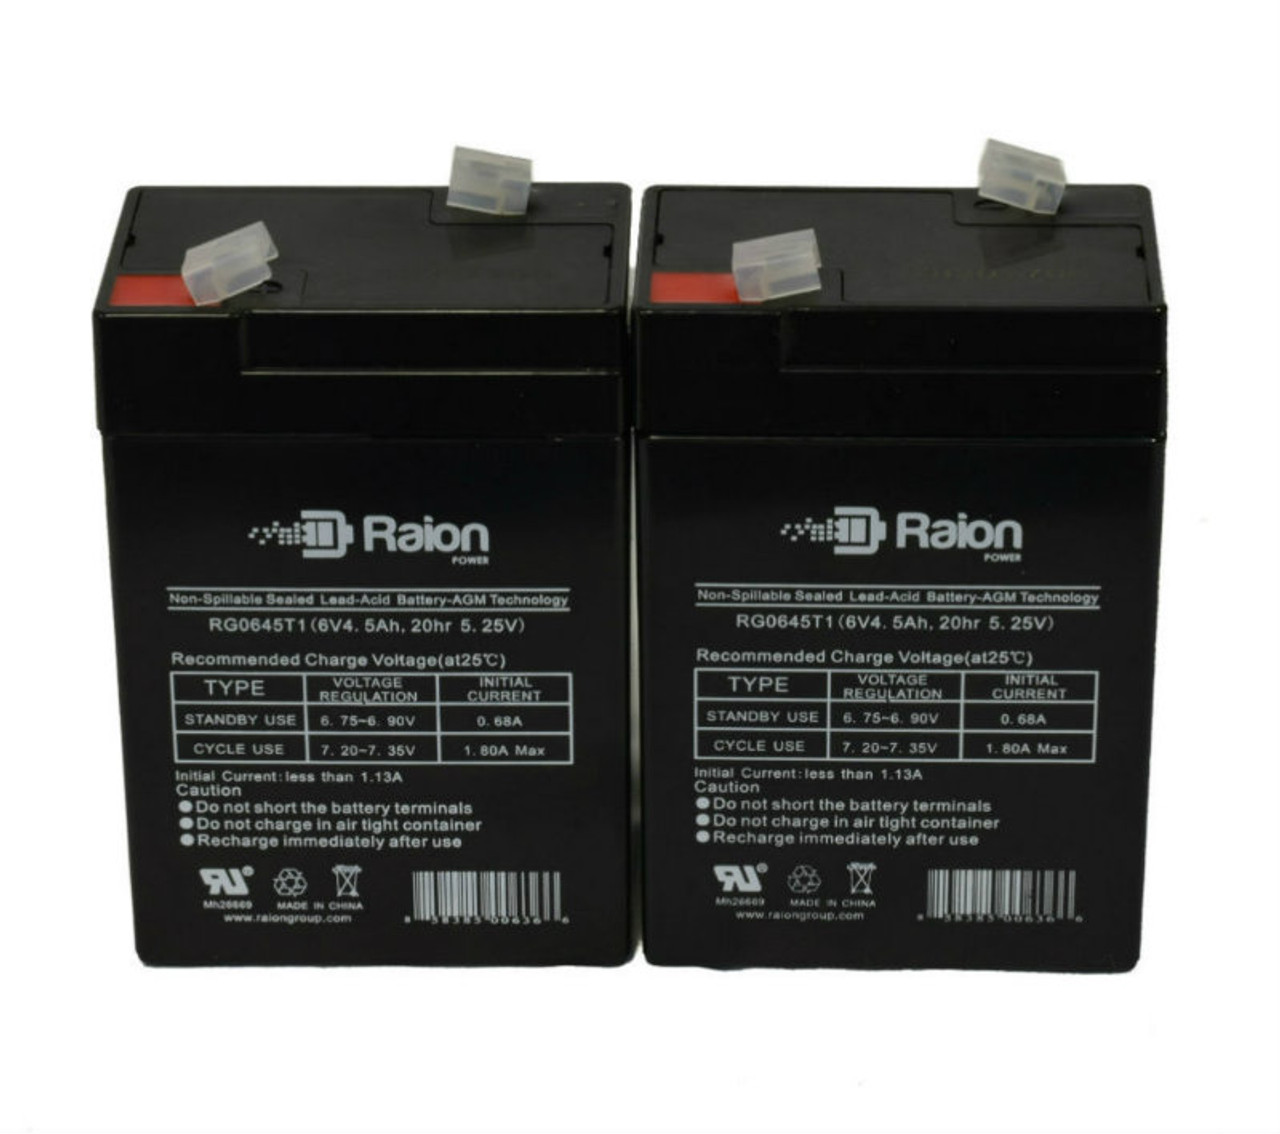 Raion Power 6 Volt 4.5Ah RG0645T1 Replacement Battery for National Power LS016M4 - 2 Pack